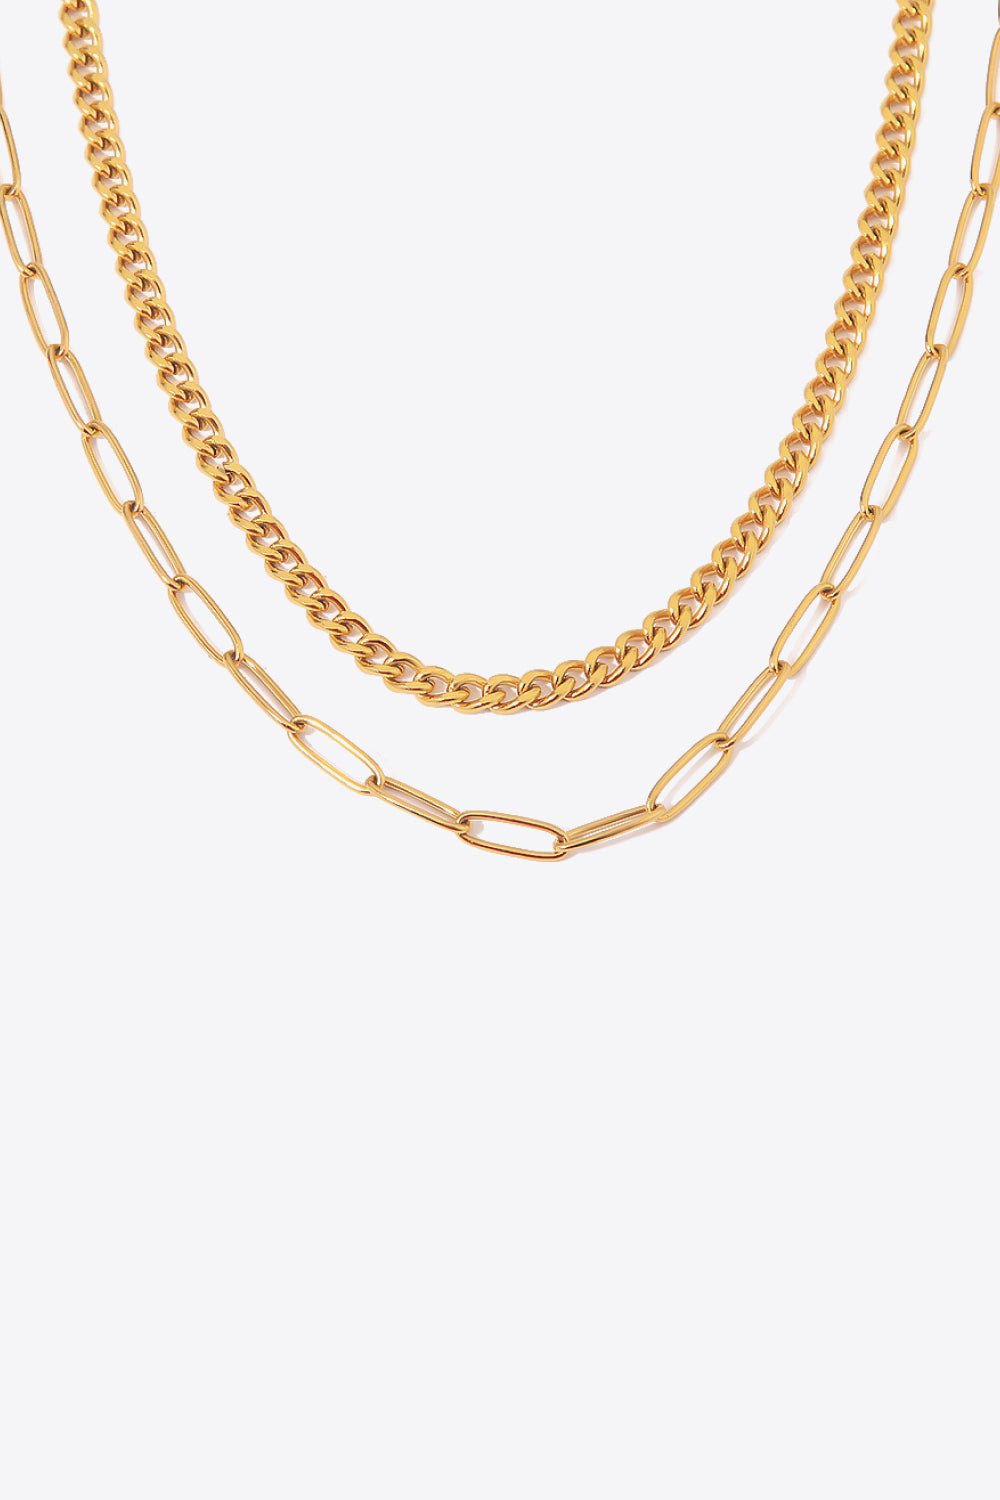 18K Gold Plated Layered Chain Necklace - #WestTrend#